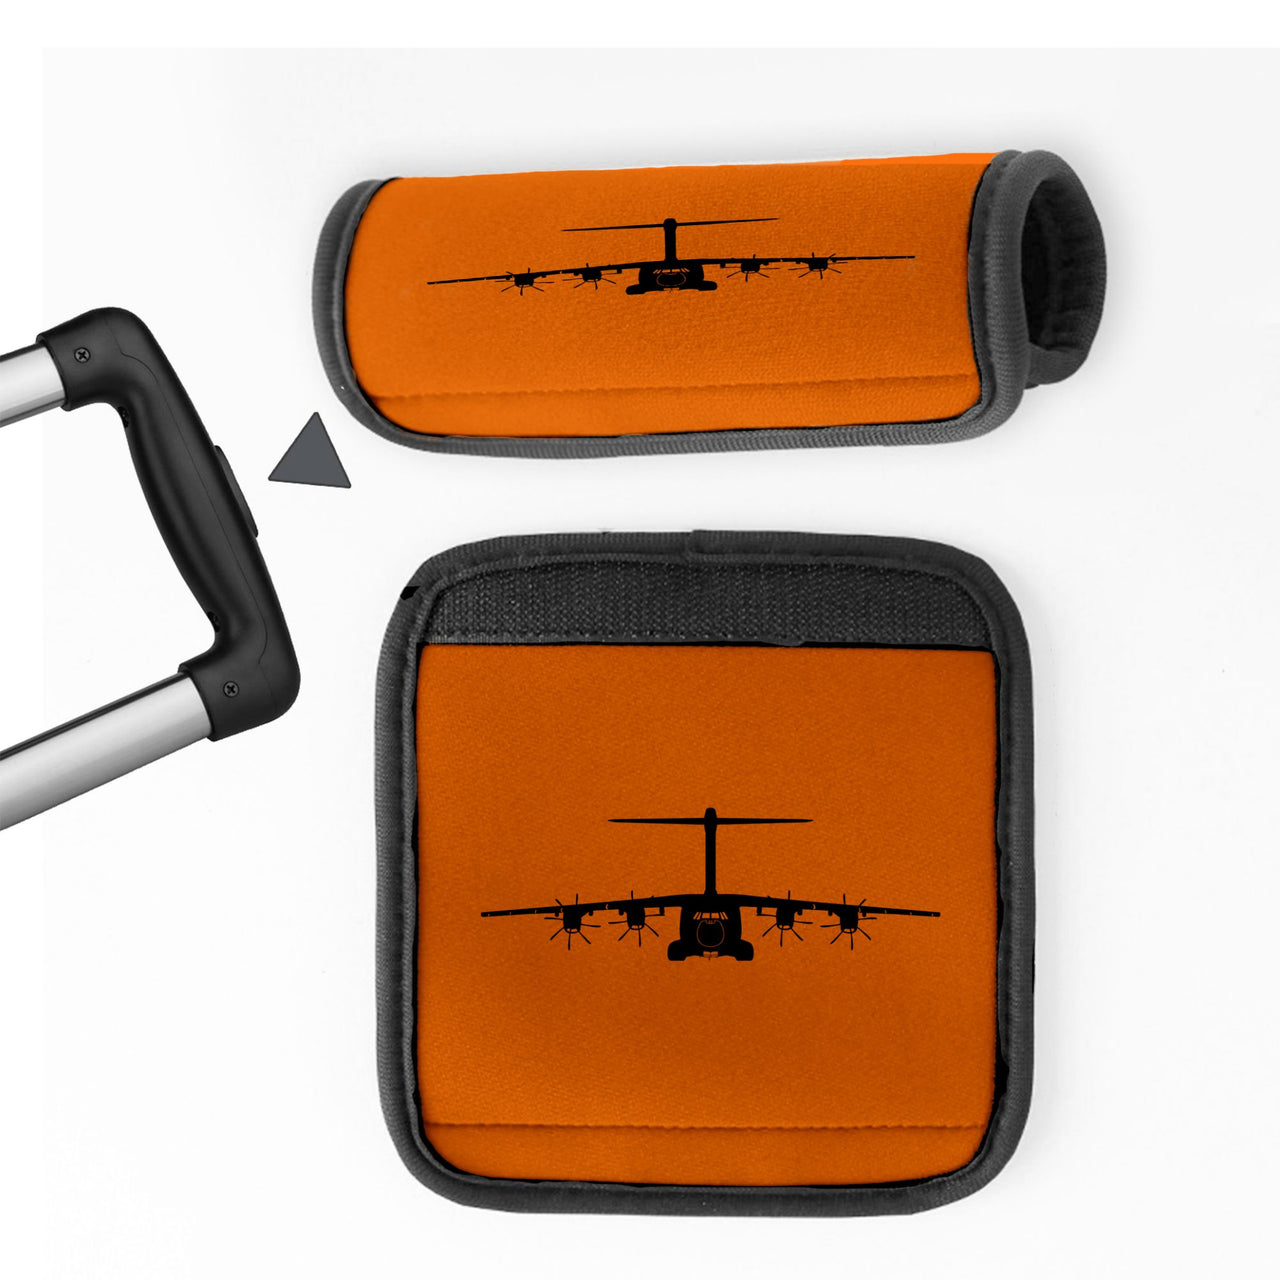 Airbus A400M Silhouette Designed Neoprene Luggage Handle Covers